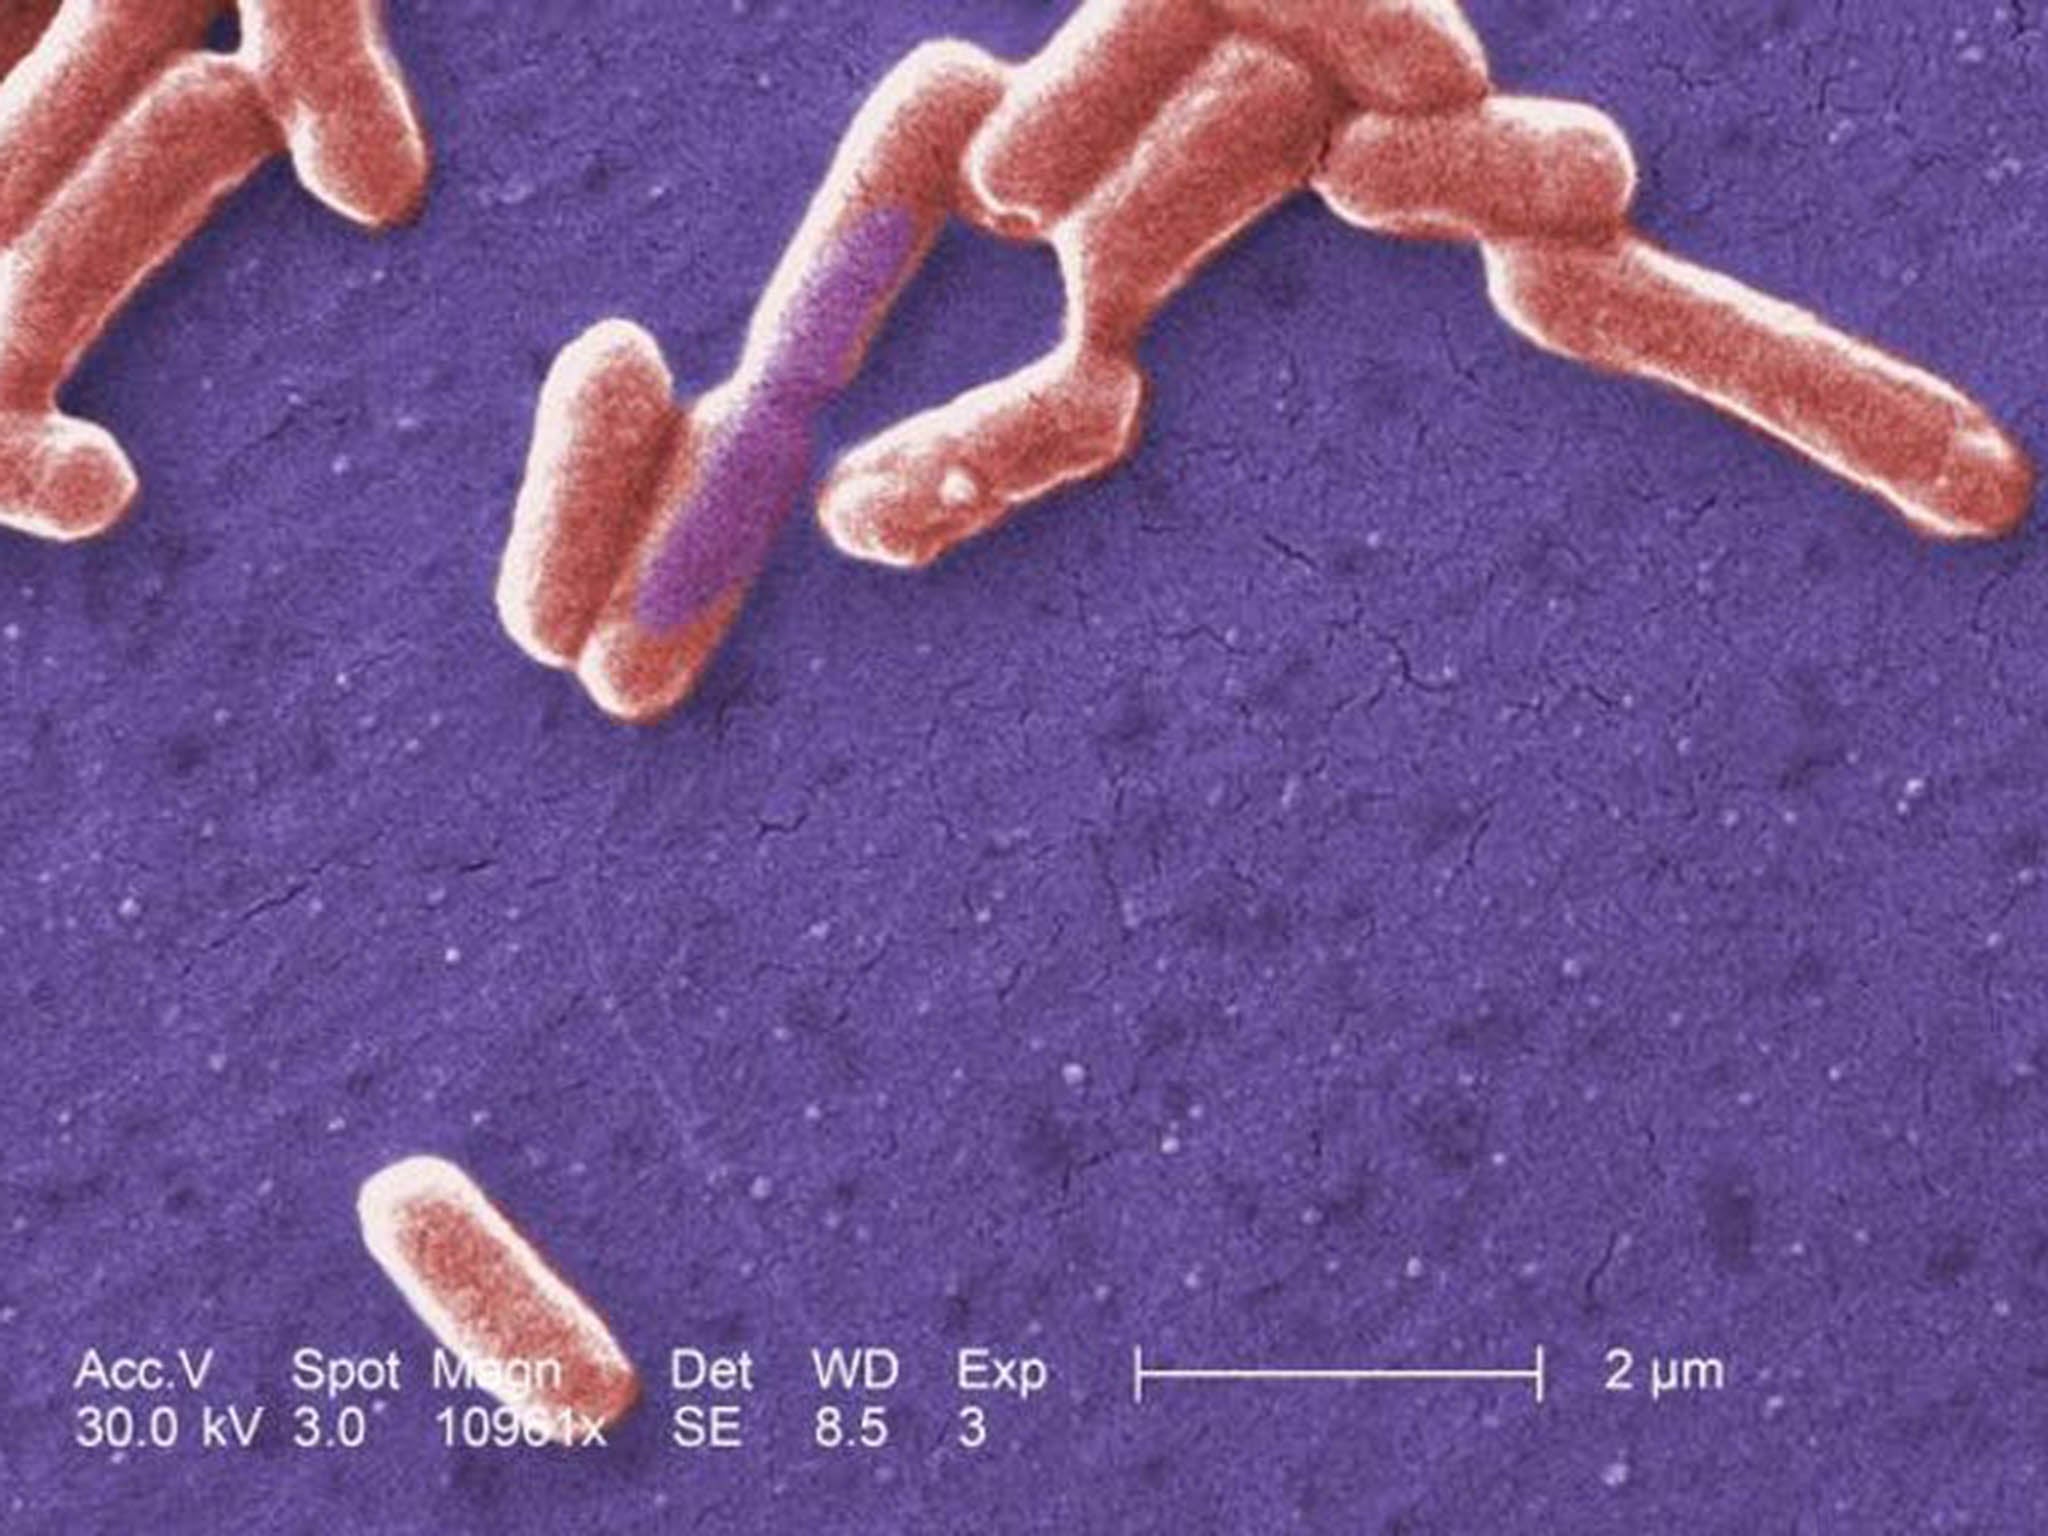 E coli can survive in higher oxygen environments than the normal colon